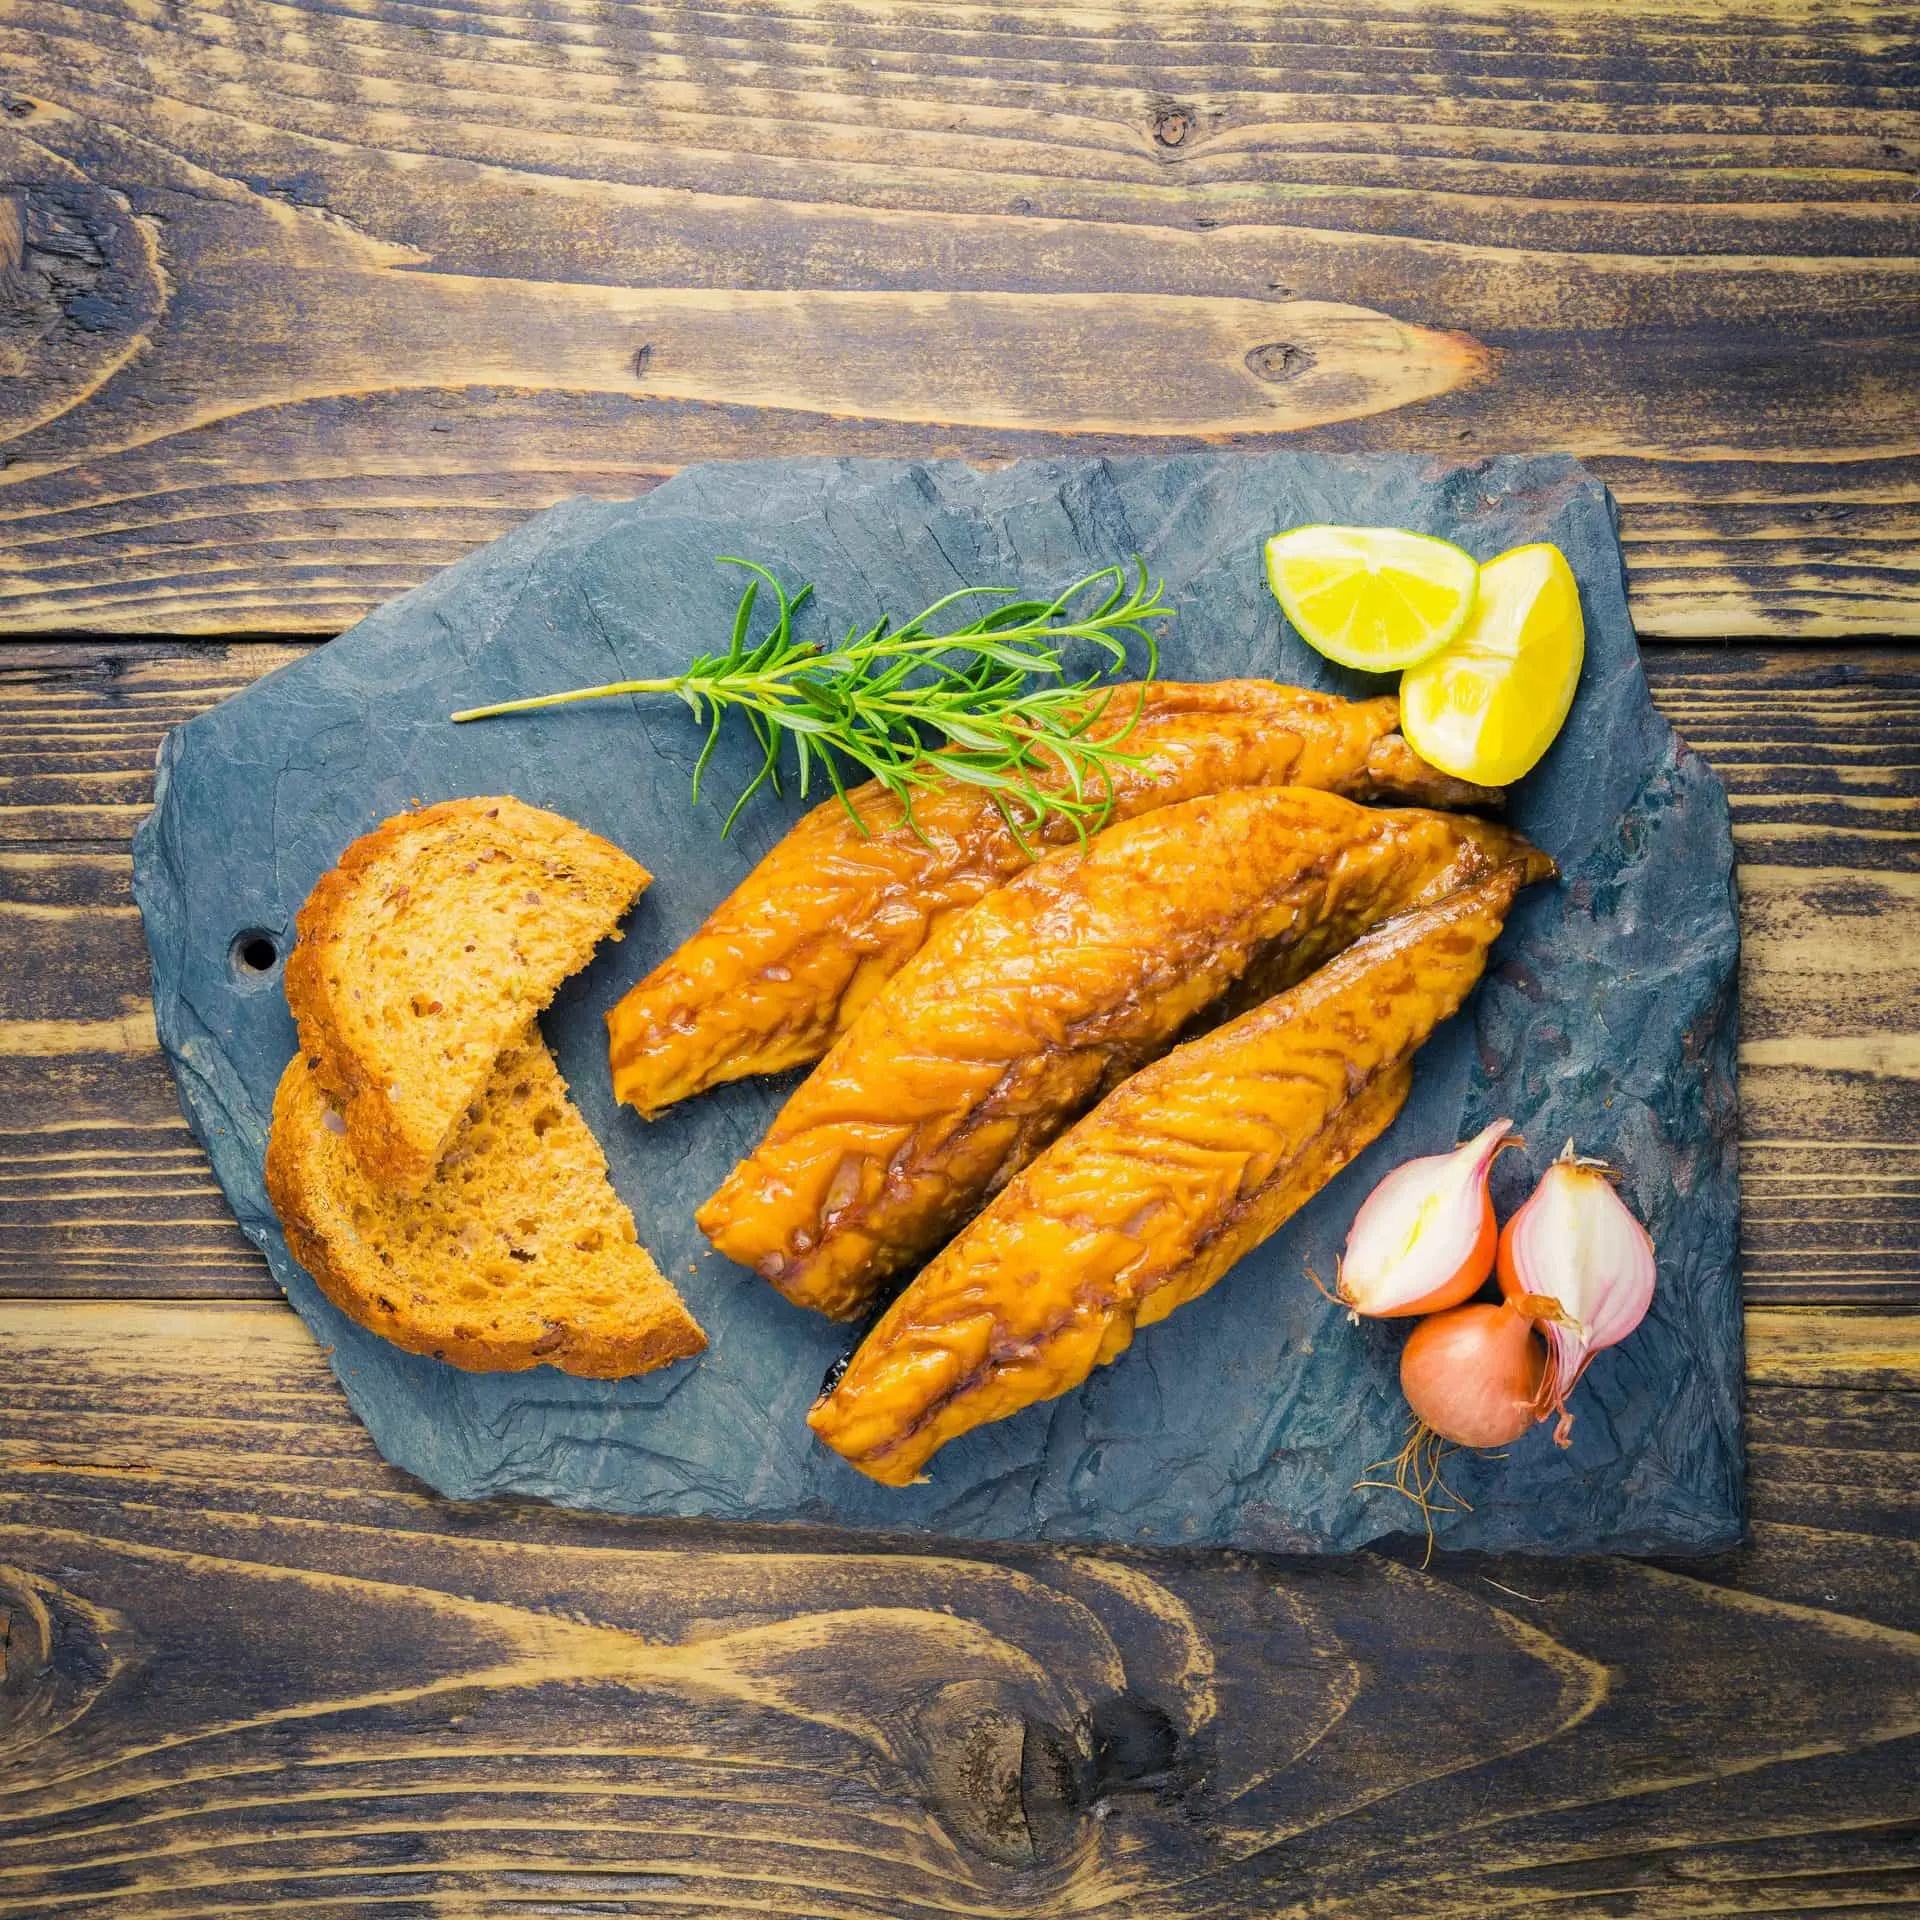 can you heat ready to eat smoked mackerel - Can you microwave ready to eat smoked mackerel